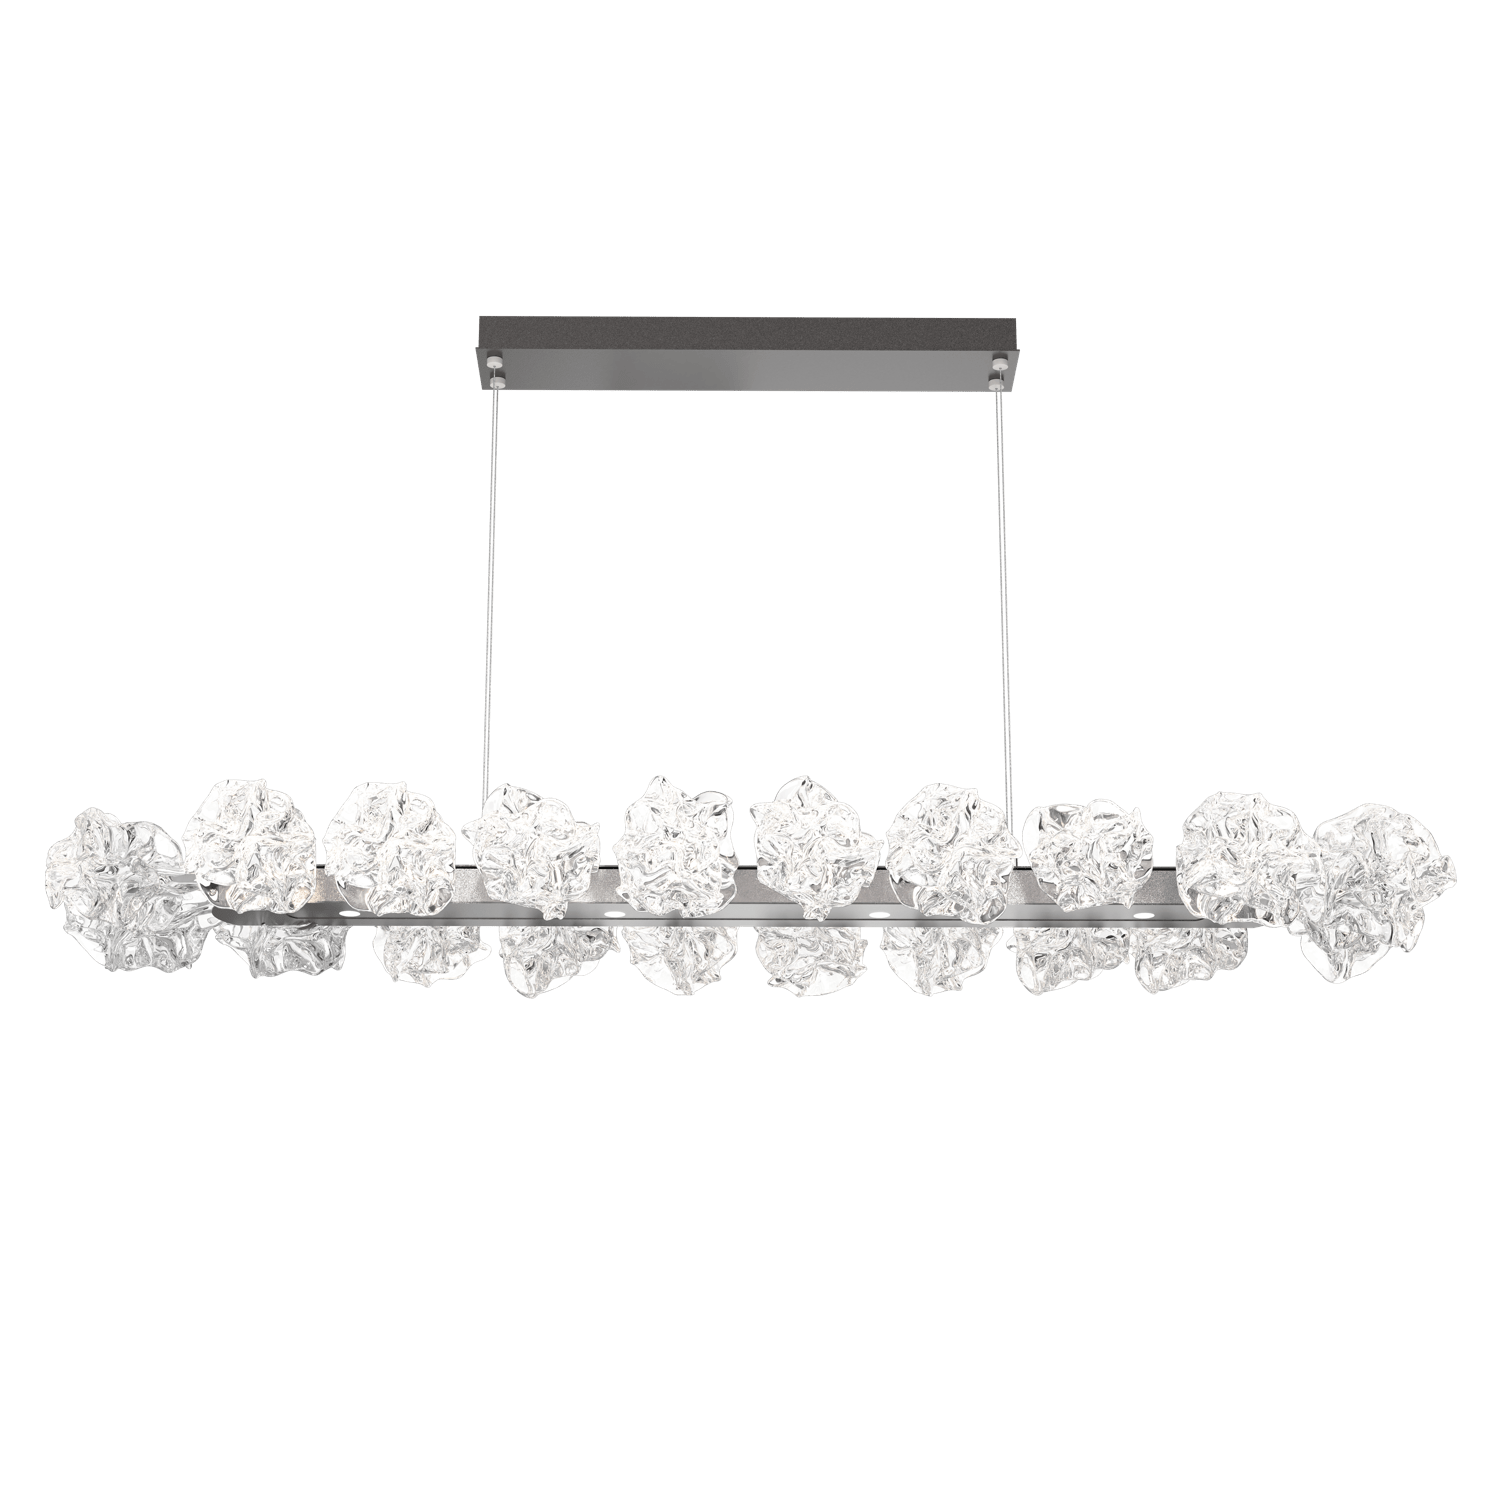 PLB0059-60-GP-Hammerton-Studio-Blossom-60-inch-linear-chandelier-with-graphite-finish-and-clear-handblown-crystal-glass-shades-and-LED-lamping